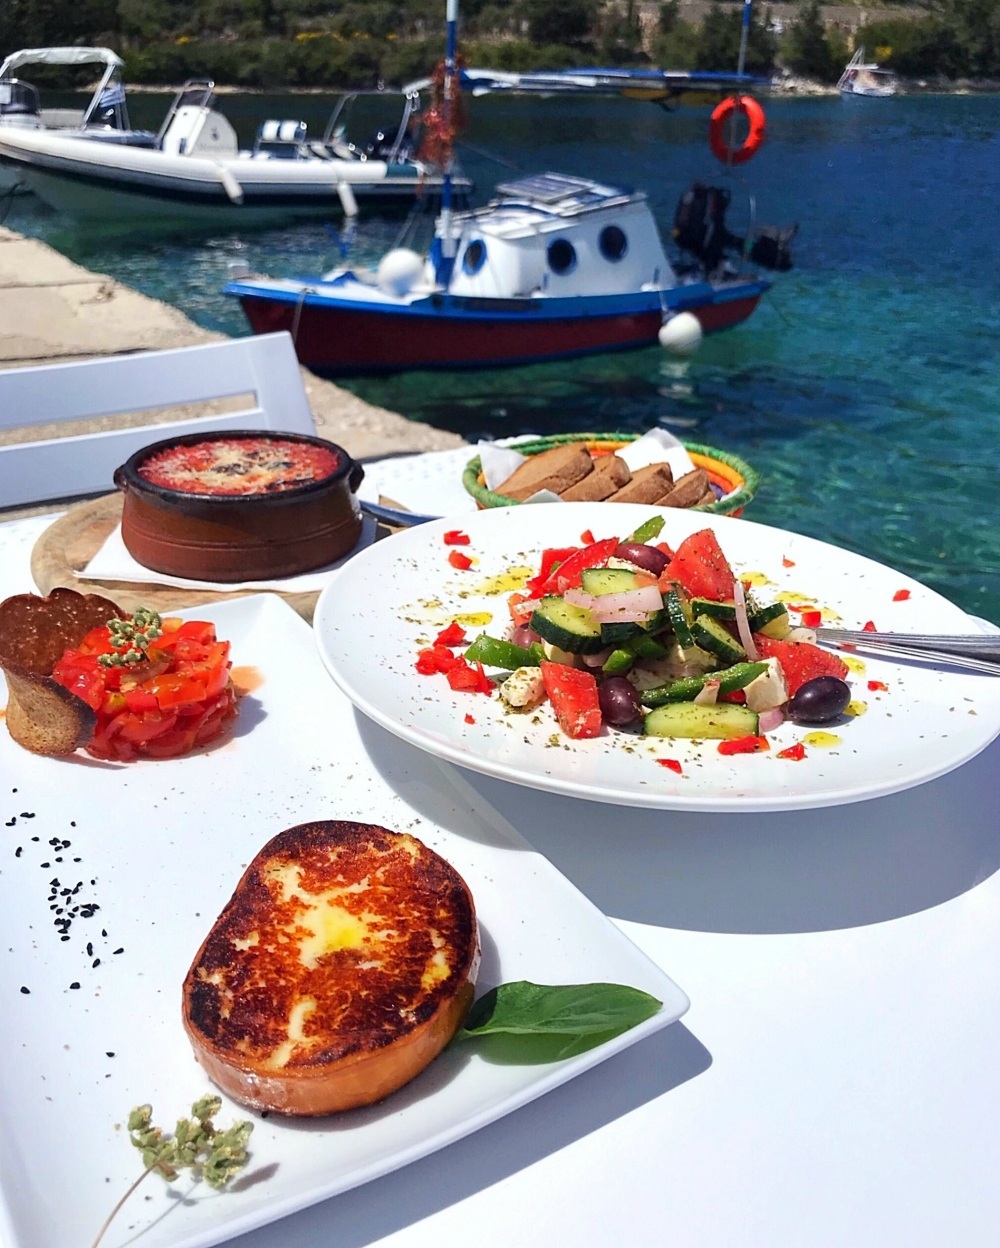 Lunch at Carnayo Gold at Mongonissi bay in Paxos Photo Heatheronhertravels.com